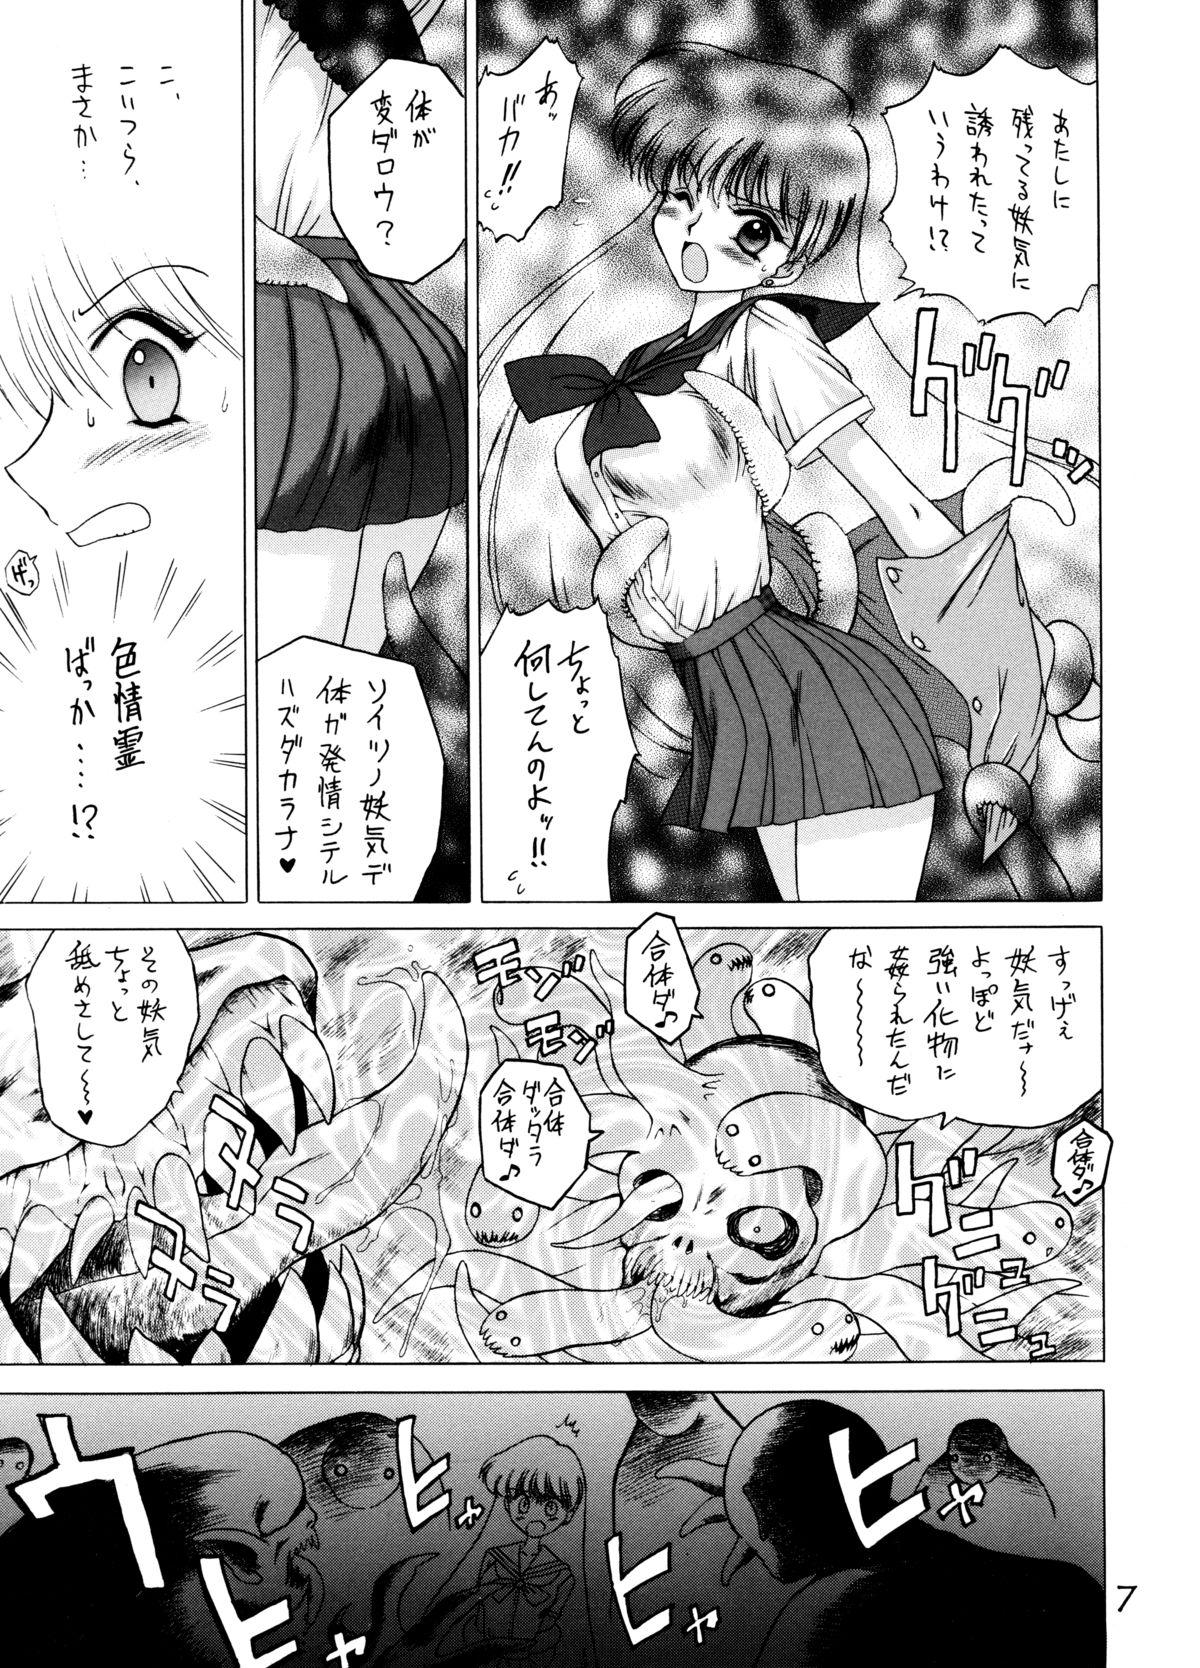 Petite Teenager Magician's Red - Sailor moon Screaming - Page 6